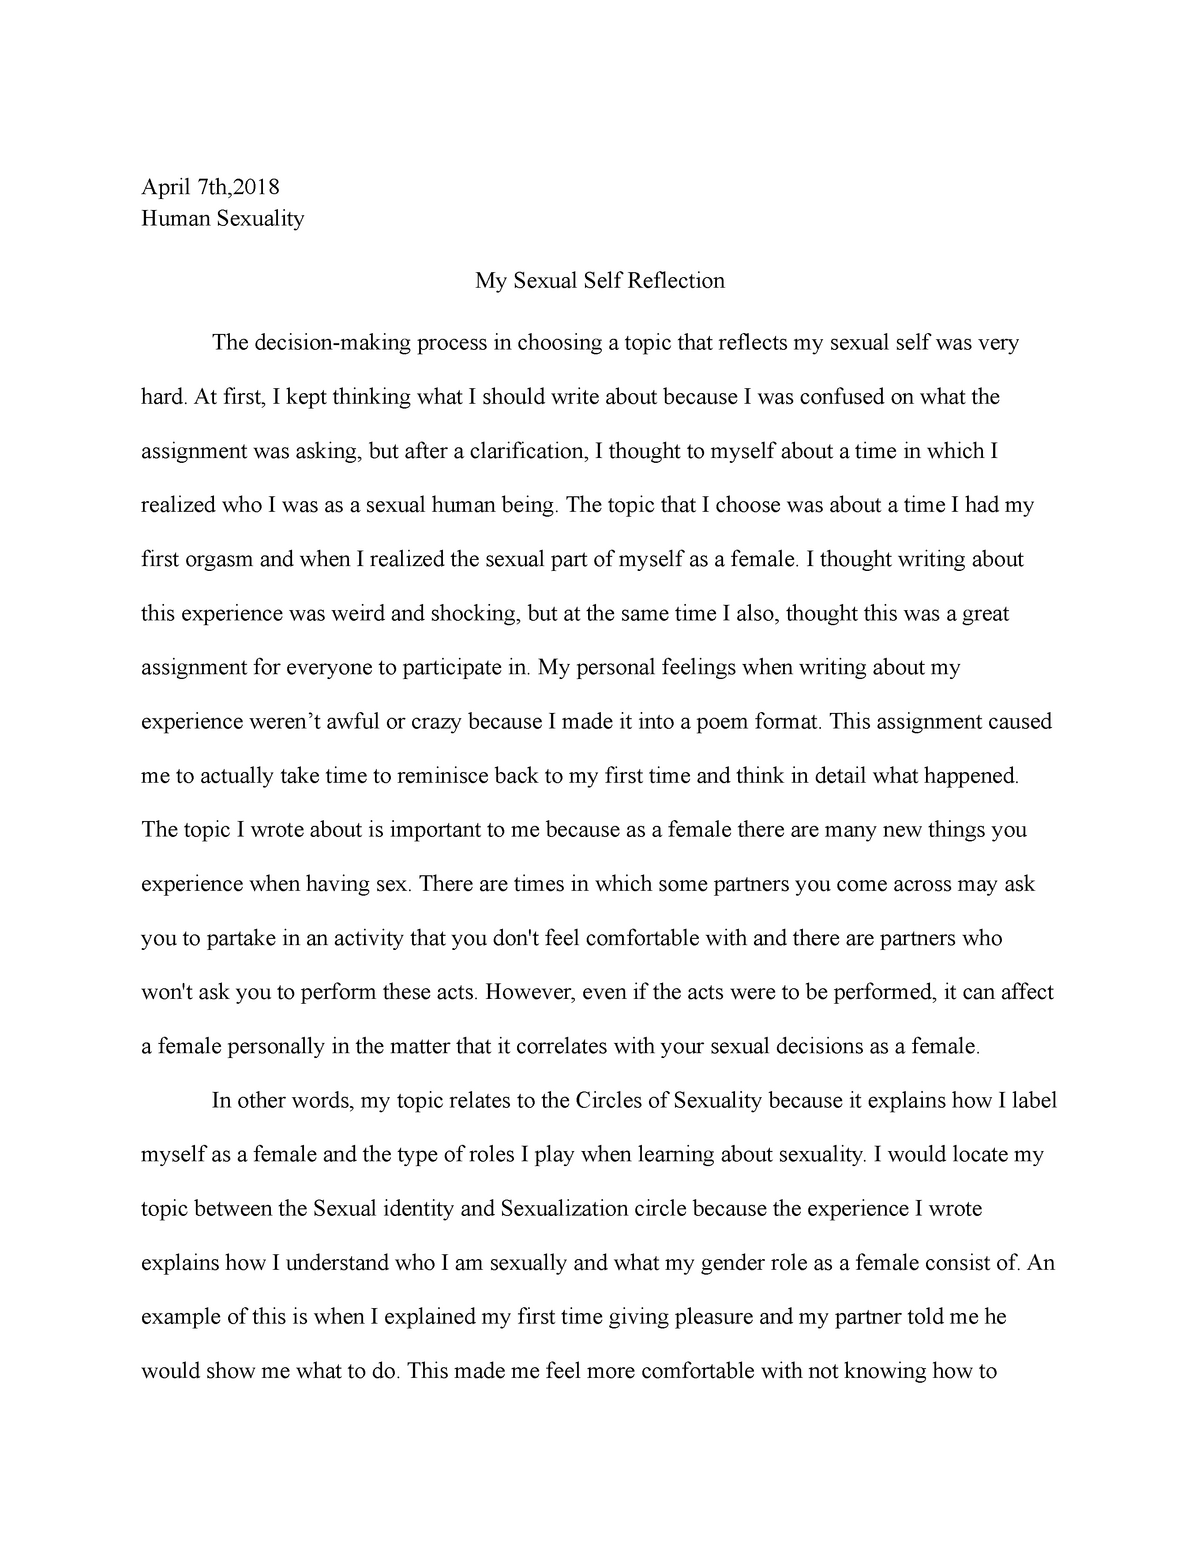 reflective essay on human sexuality